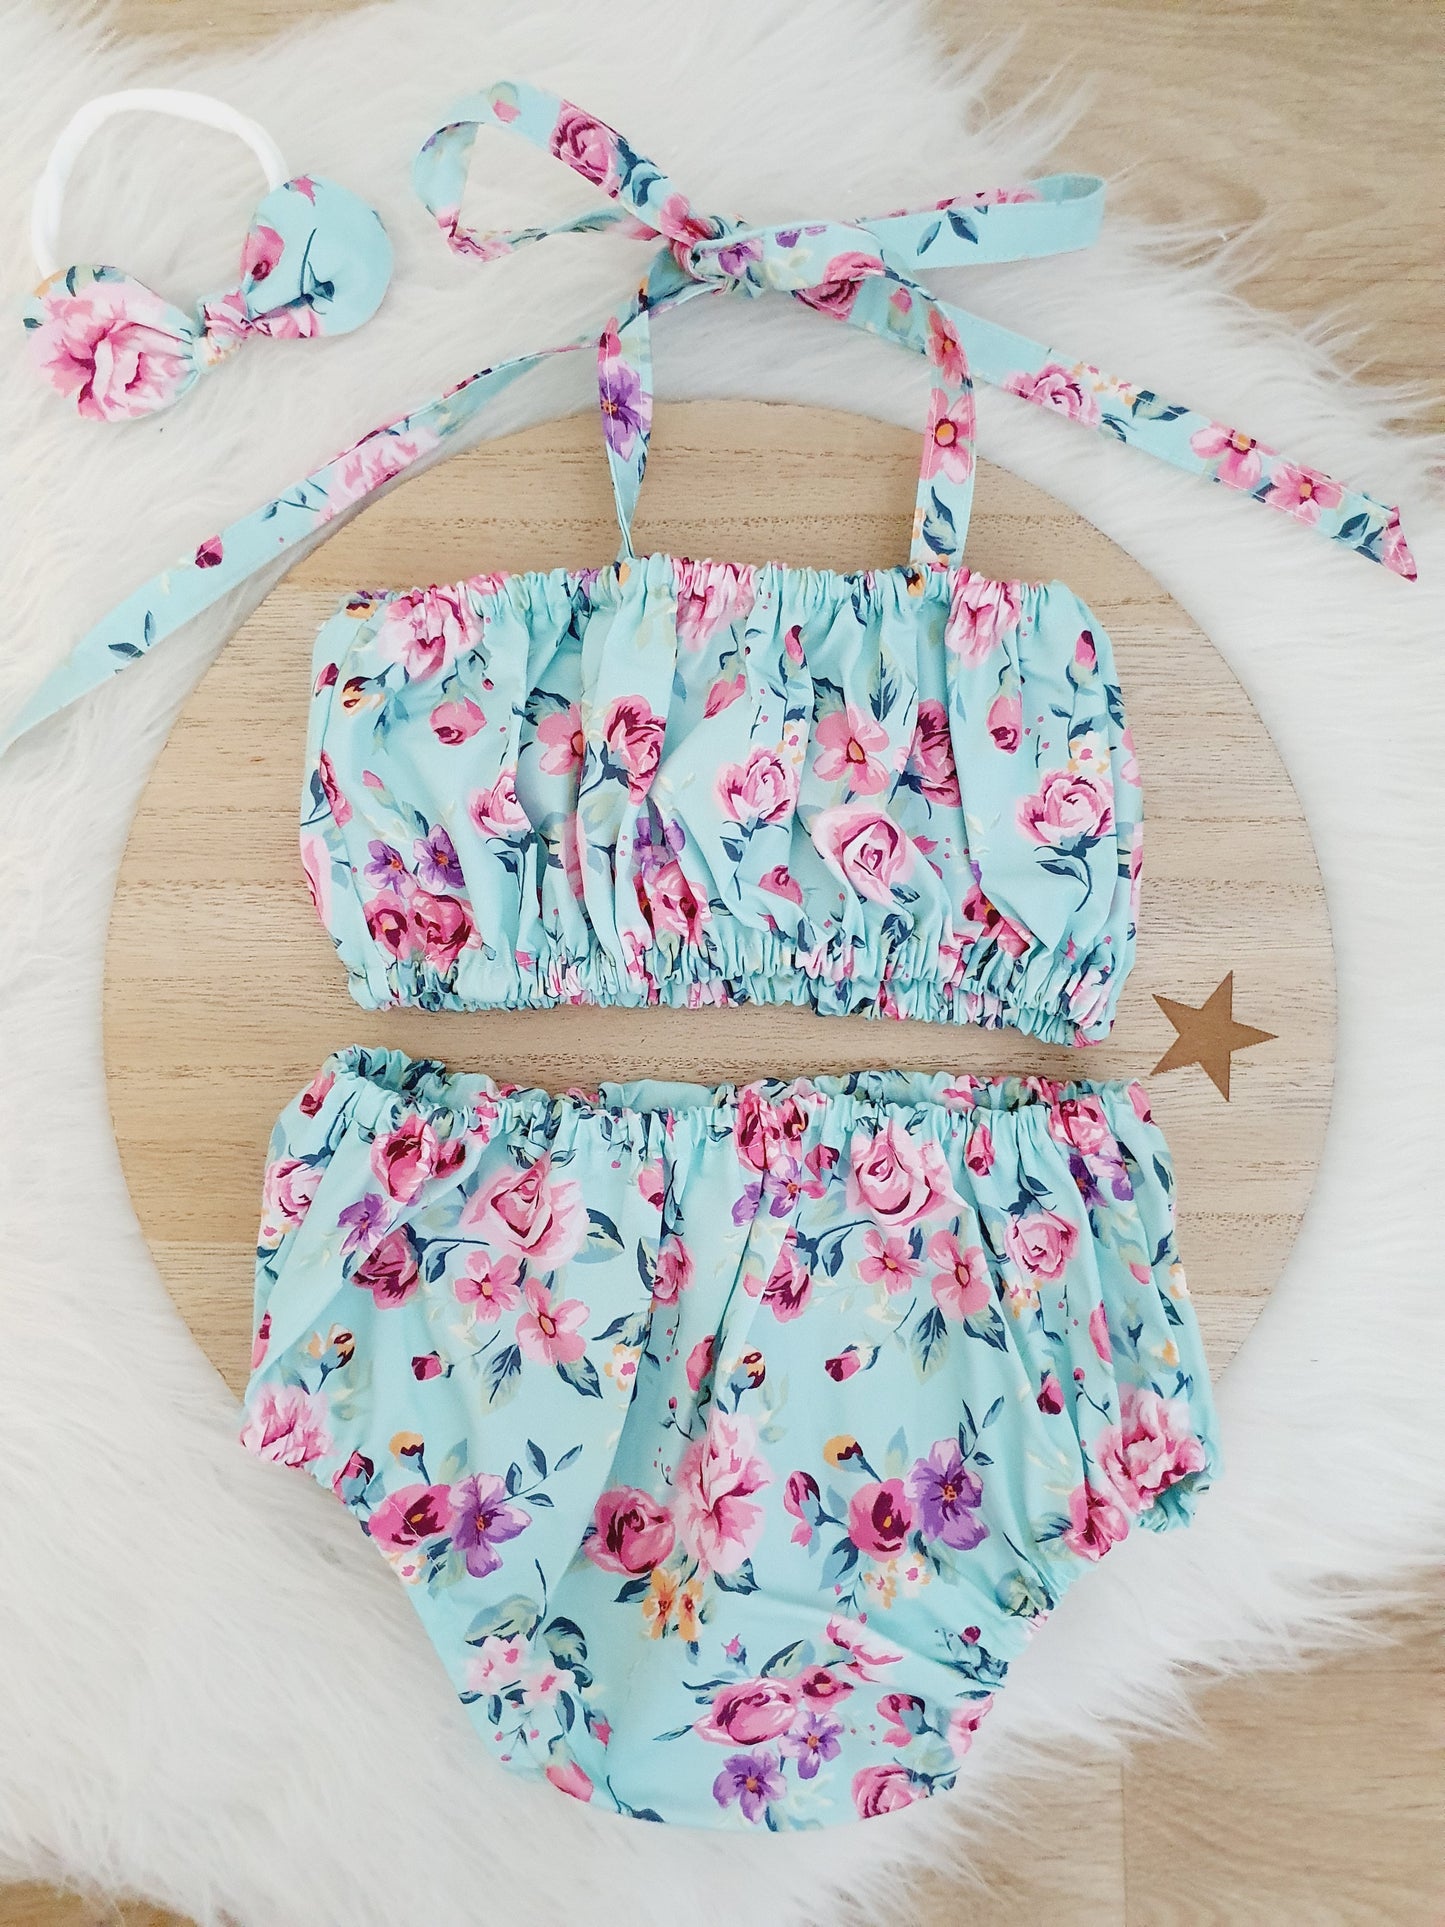 Floral Girls 1st Birthday - Cake Smash Outfit, Size 1, Nappy Cover, Headband & Crop Top Set - AQUA FLORAL